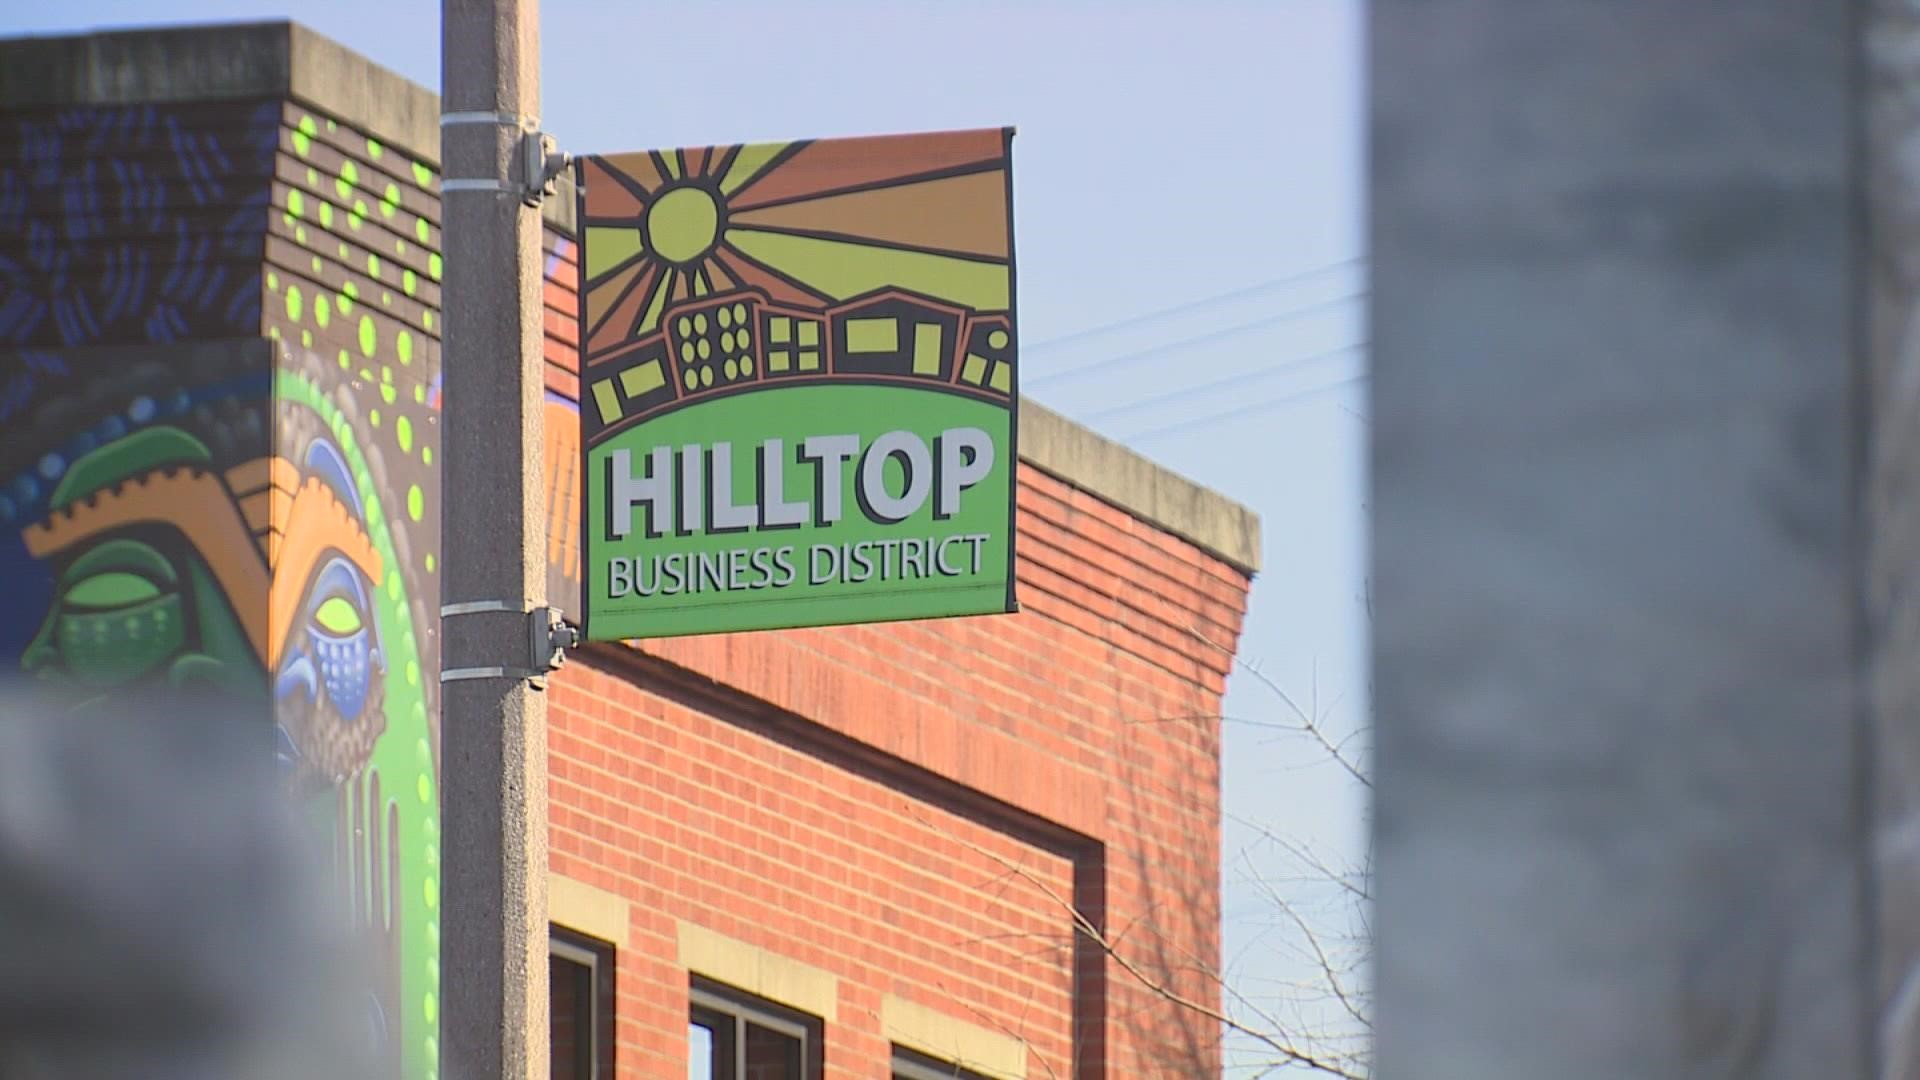 Leaders from the local, state and federal levels gathered in Tacoma’s Hilltop neighborhood to announce investment in affordable housing and BIPOC businesses.